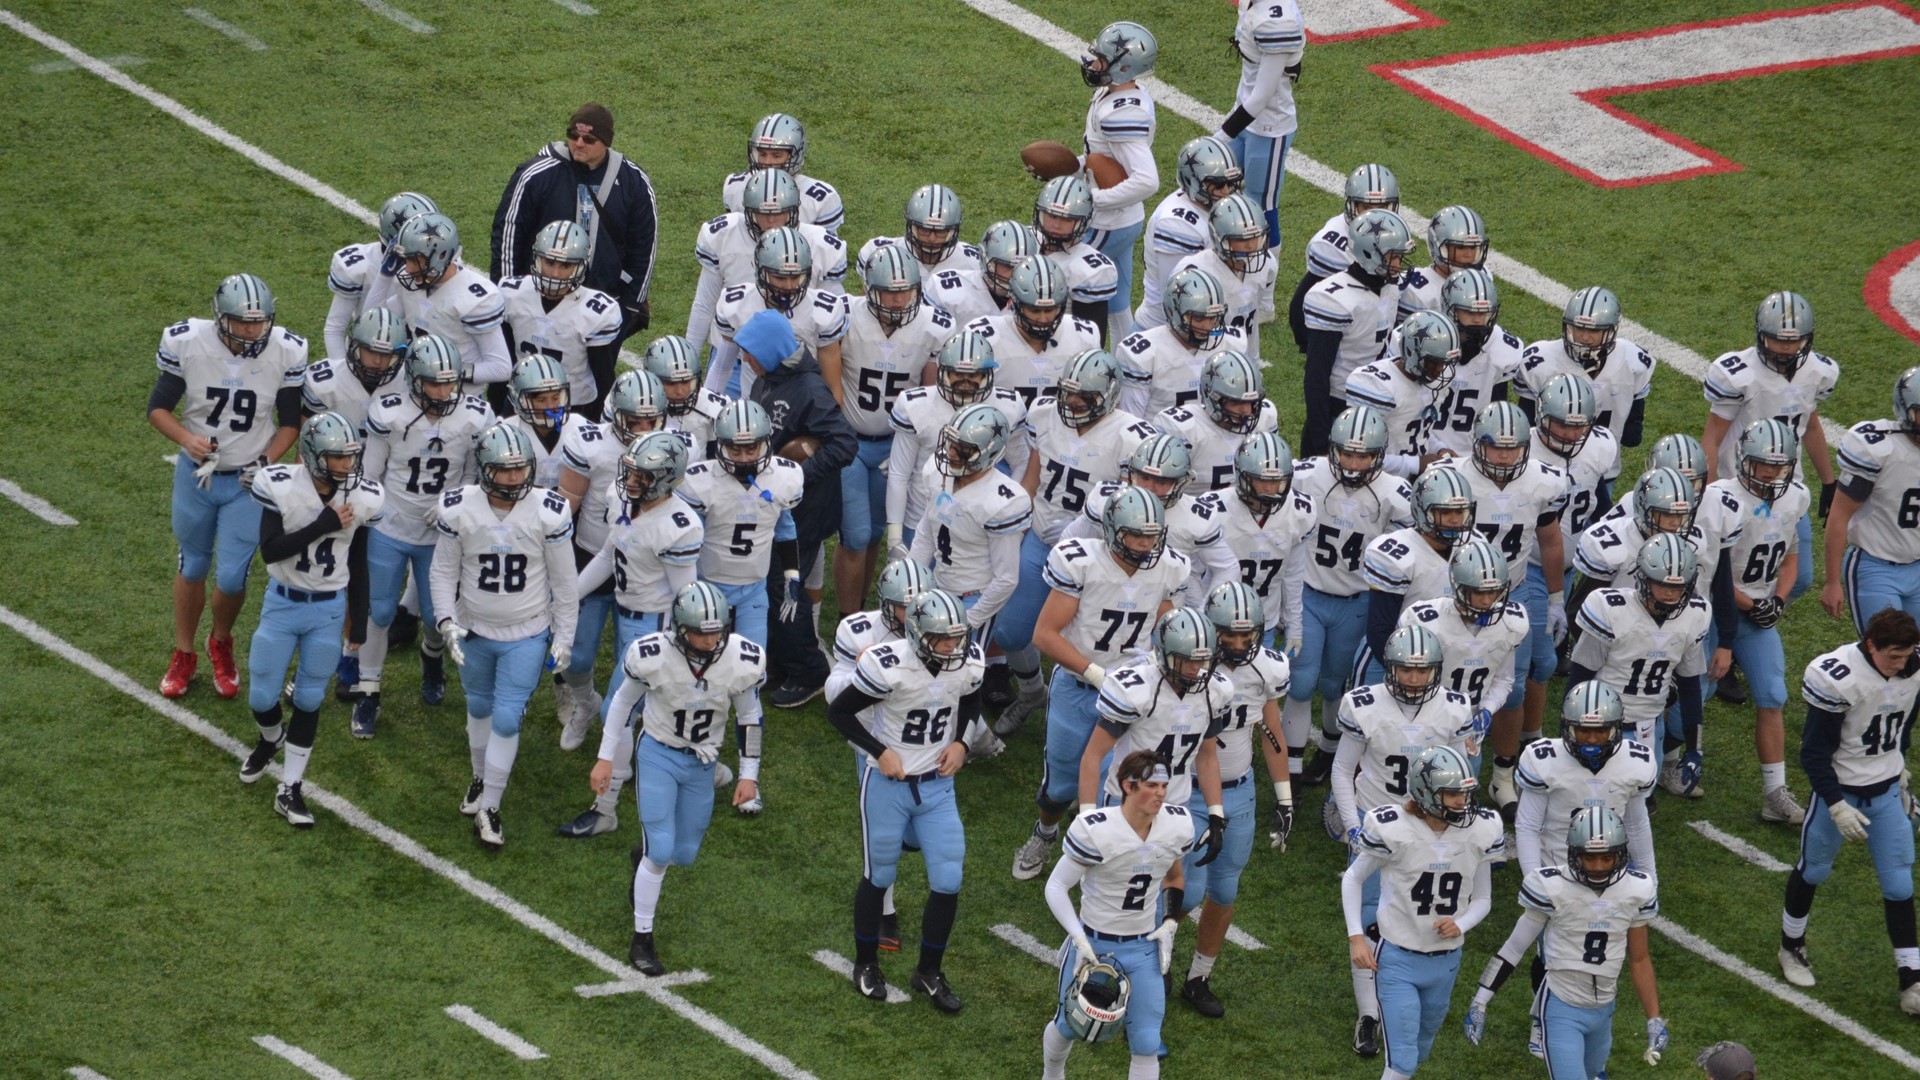 PHOTOS: Kenston Bombers earn first-ever State Championship with 42-6 win over Kettering Alter